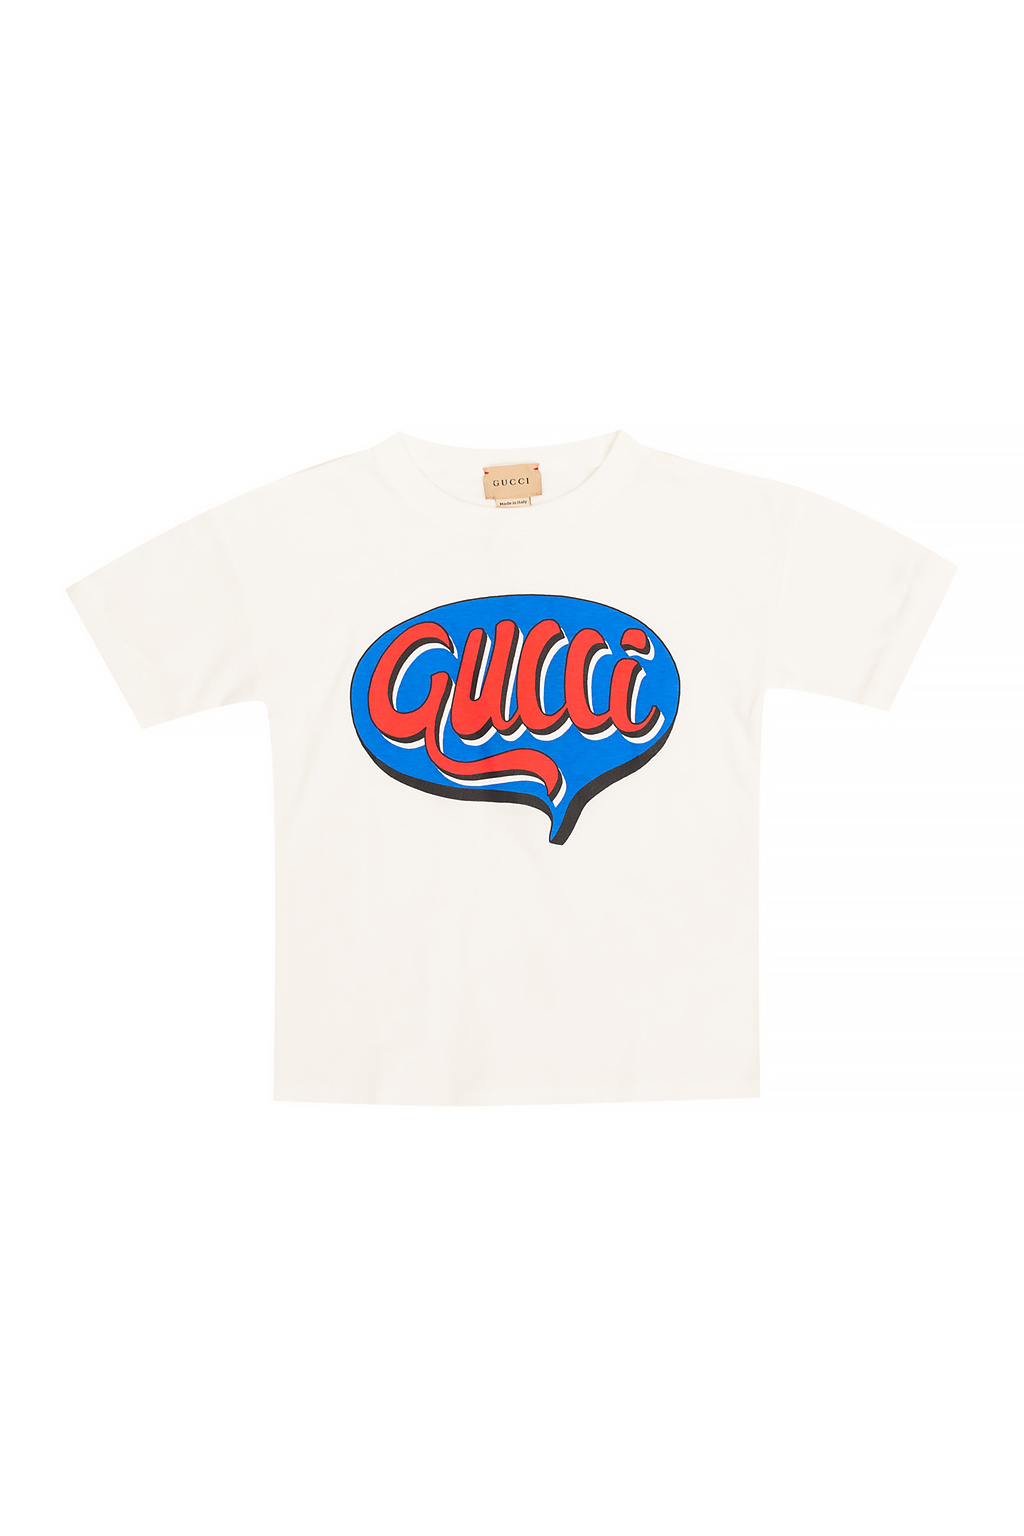 Tshirt Gucci Balenciaga white with large logos  17SB concept store   online store of trendy clothes and shoes